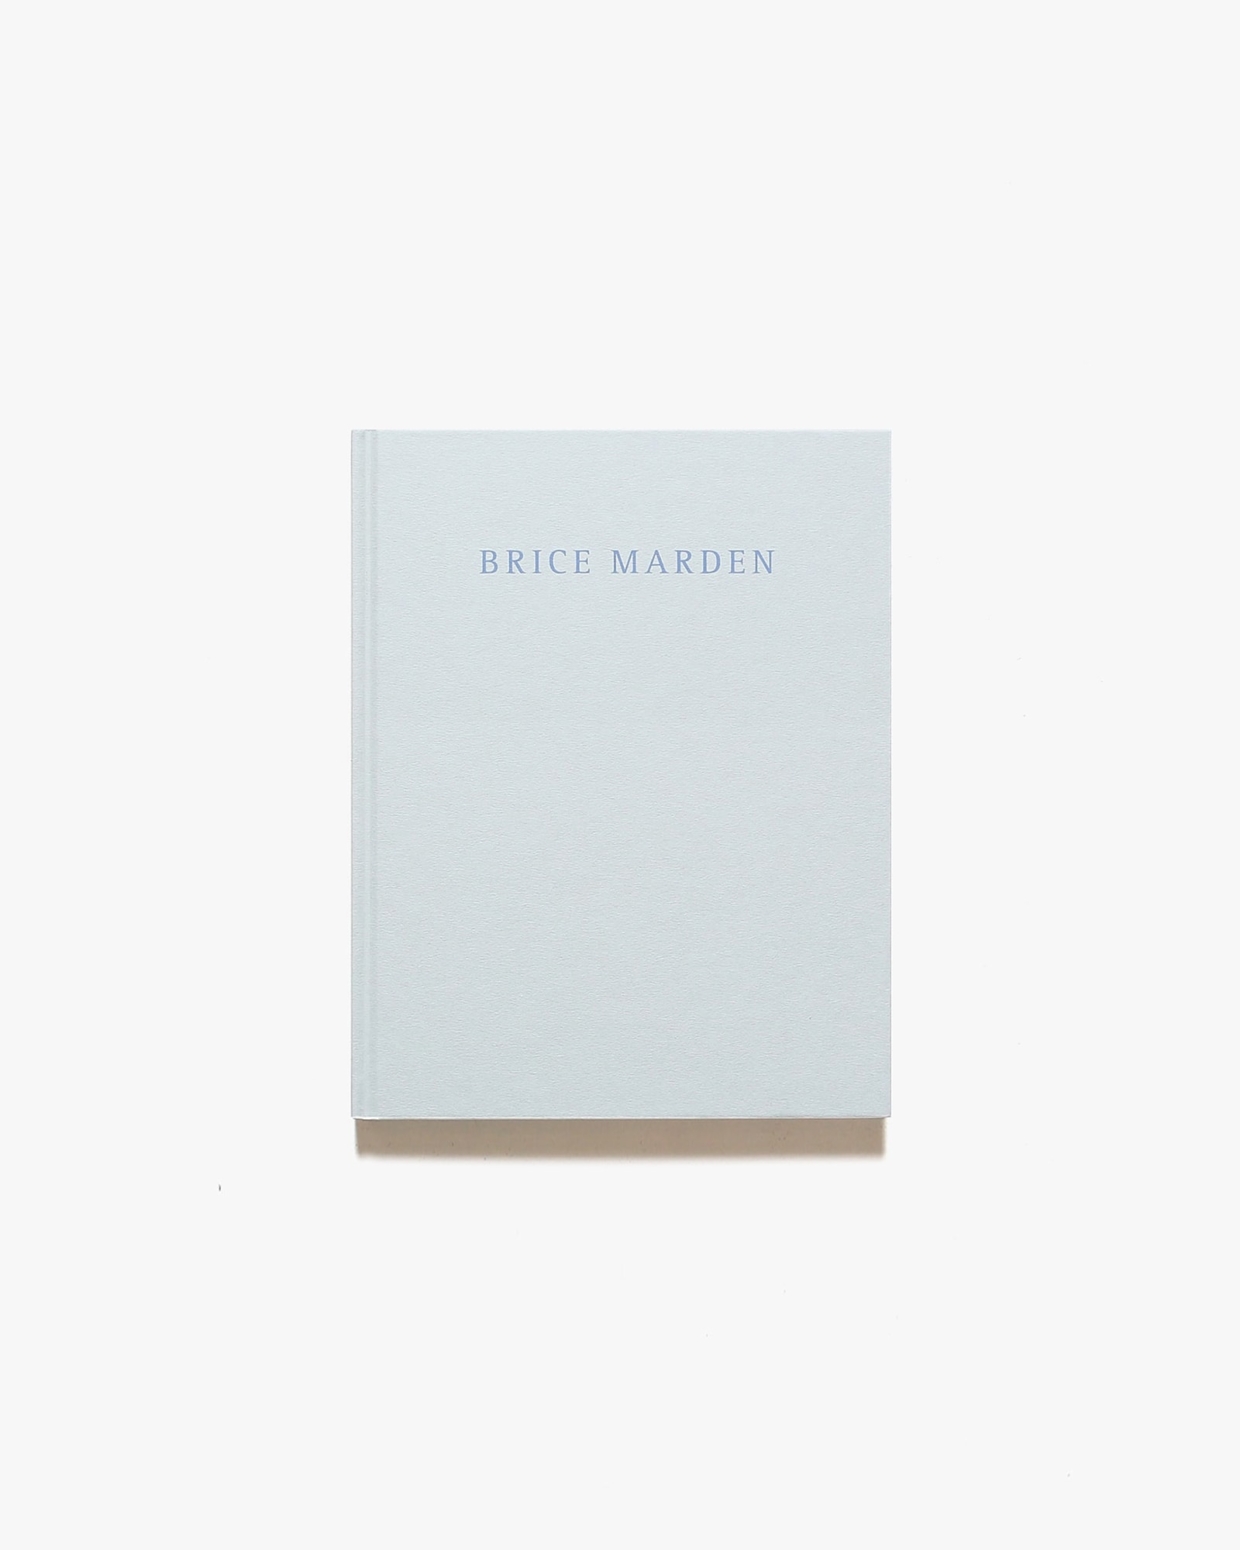 Brice Marden: Marbles and Drawings | ブライス・マーデン画集